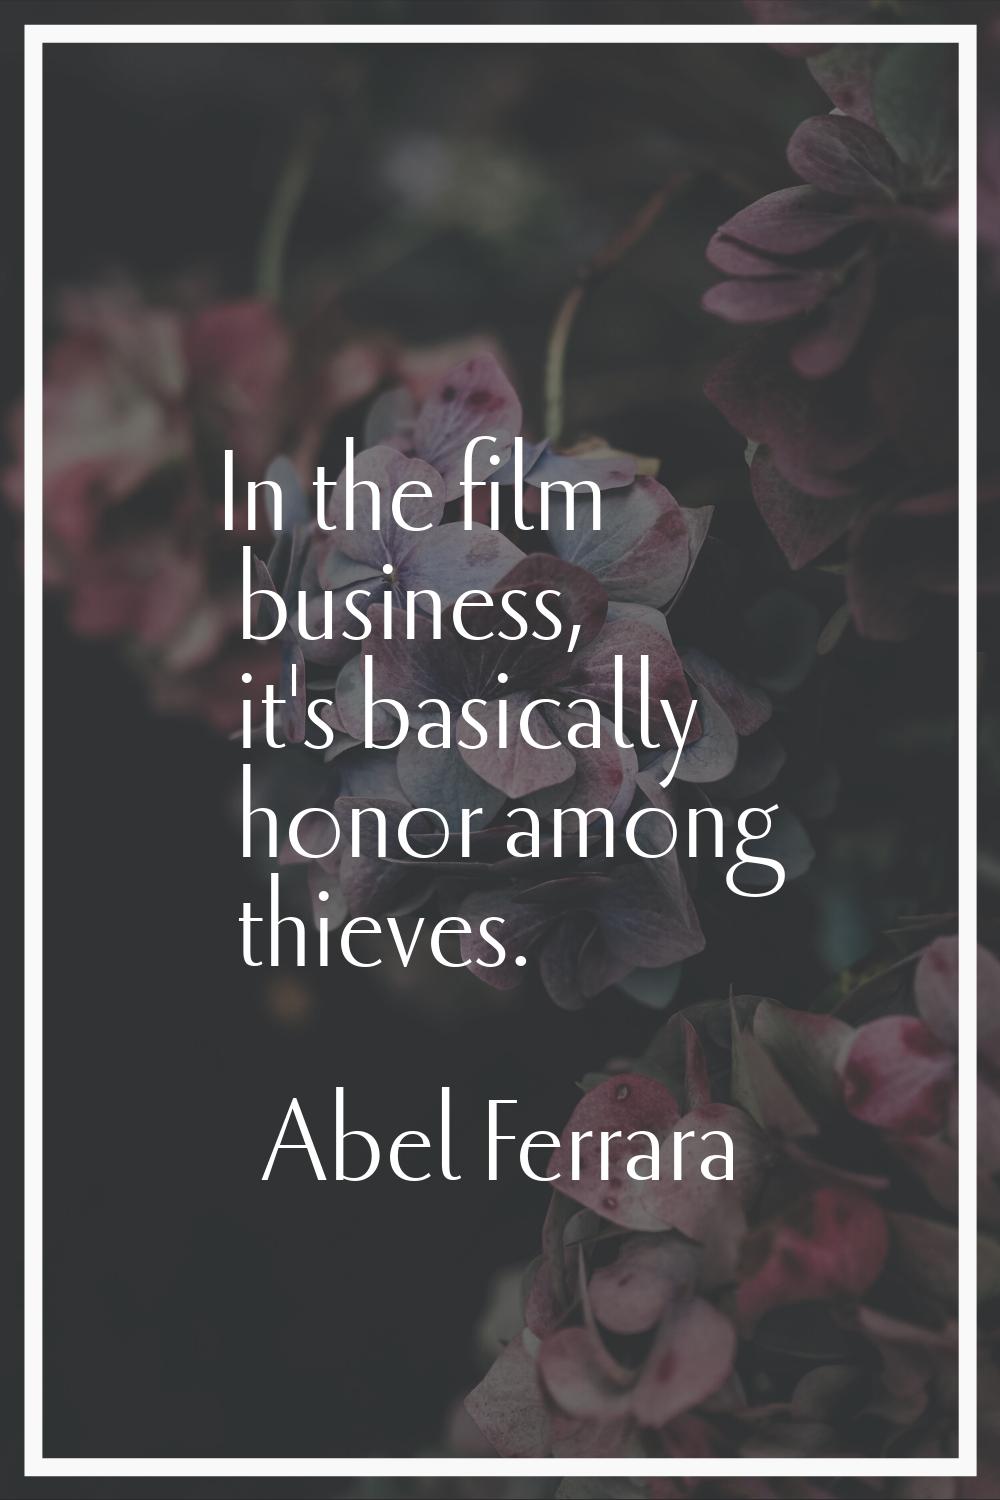 In the film business, it's basically honor among thieves.